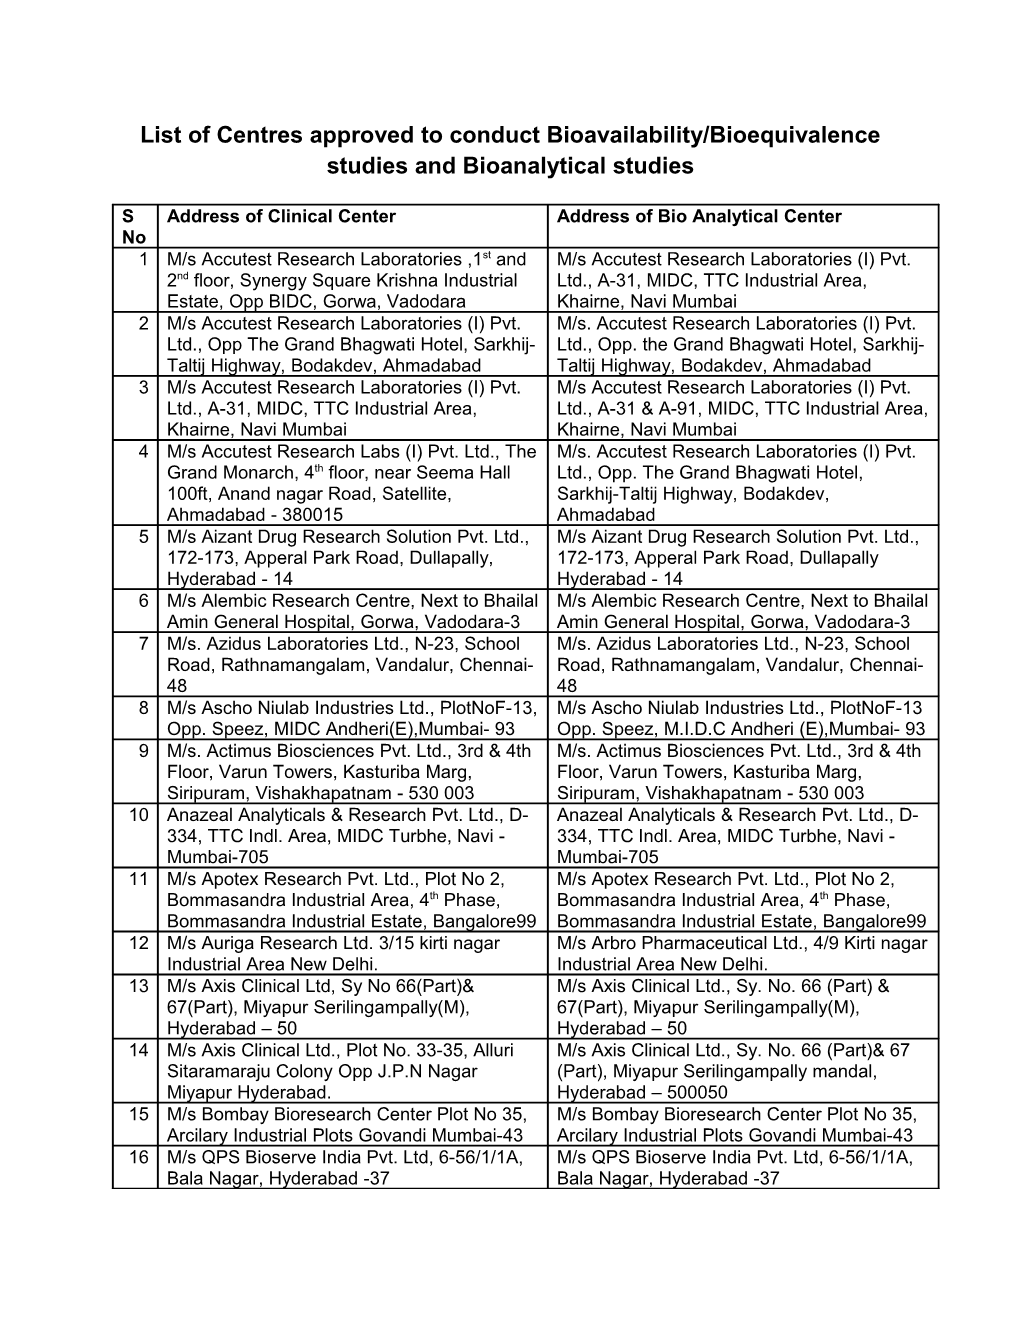 List of Centres Approved to Conduct Bioavailability/Bioequivalence Studies and Bioanalytical